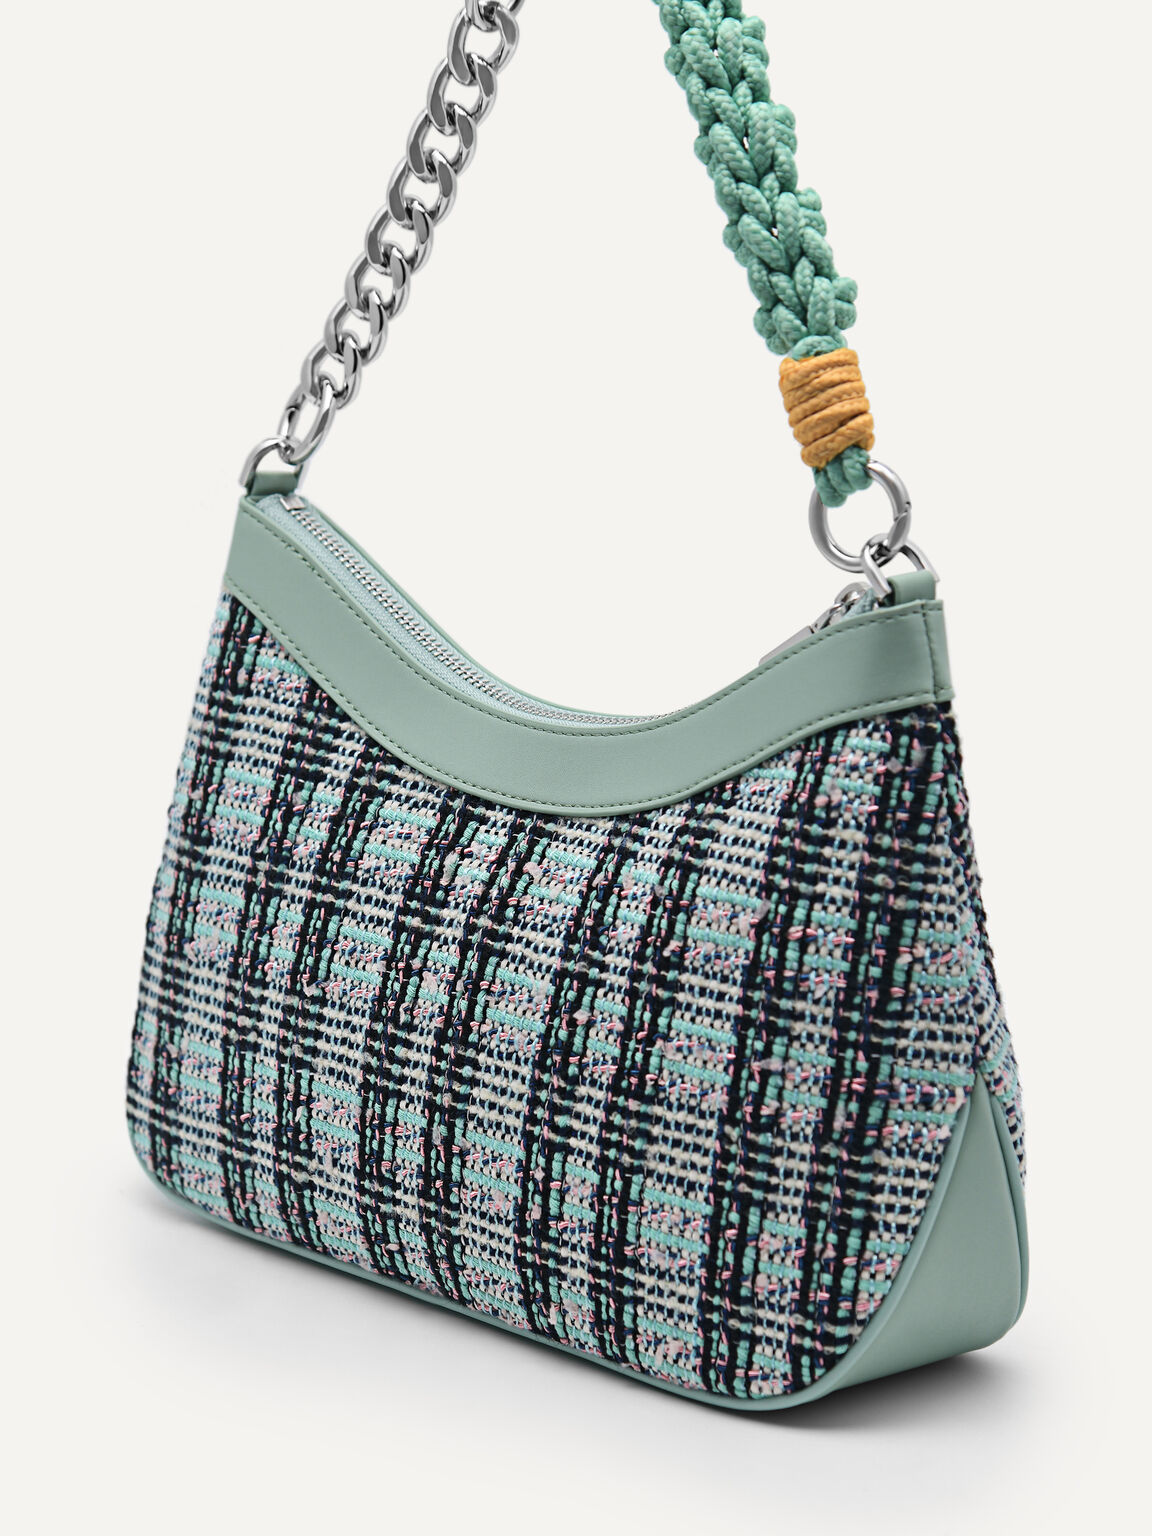 Slouchy Shoulder Bag with Braided Chain, Multi